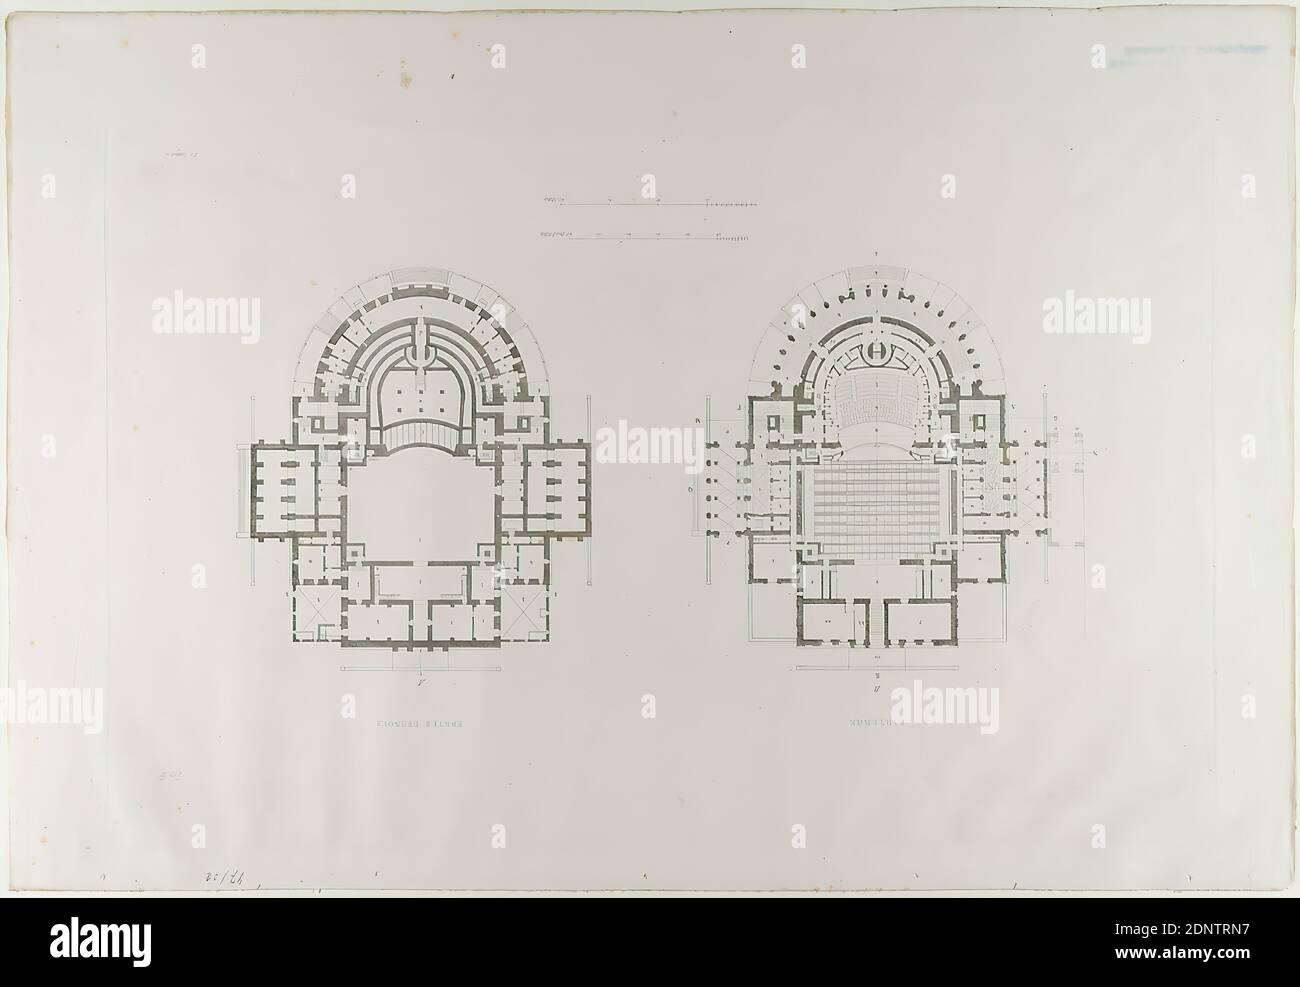 Ernst Christian Schmidt, Verlag Friedrich Vieweg und Sohn, Gottfried Semper, floor plans of the lower rooms and the first floor. From the portfolio Das Königliche Hoftheater zu Dresden, ed. by Gottfried Semper, Braunschweig 1849, old stock, probably a 1903, paper, copperplate engraving, plate: height: 28 cm; width: 45 cm, inscribed: in the printing forme: E. C. Schmidt sc, TAB IV, address, portfolio works, draft, plan of a building, theater, theater performance, architecture, opera house, hist. Building, locality, street Stock Photo